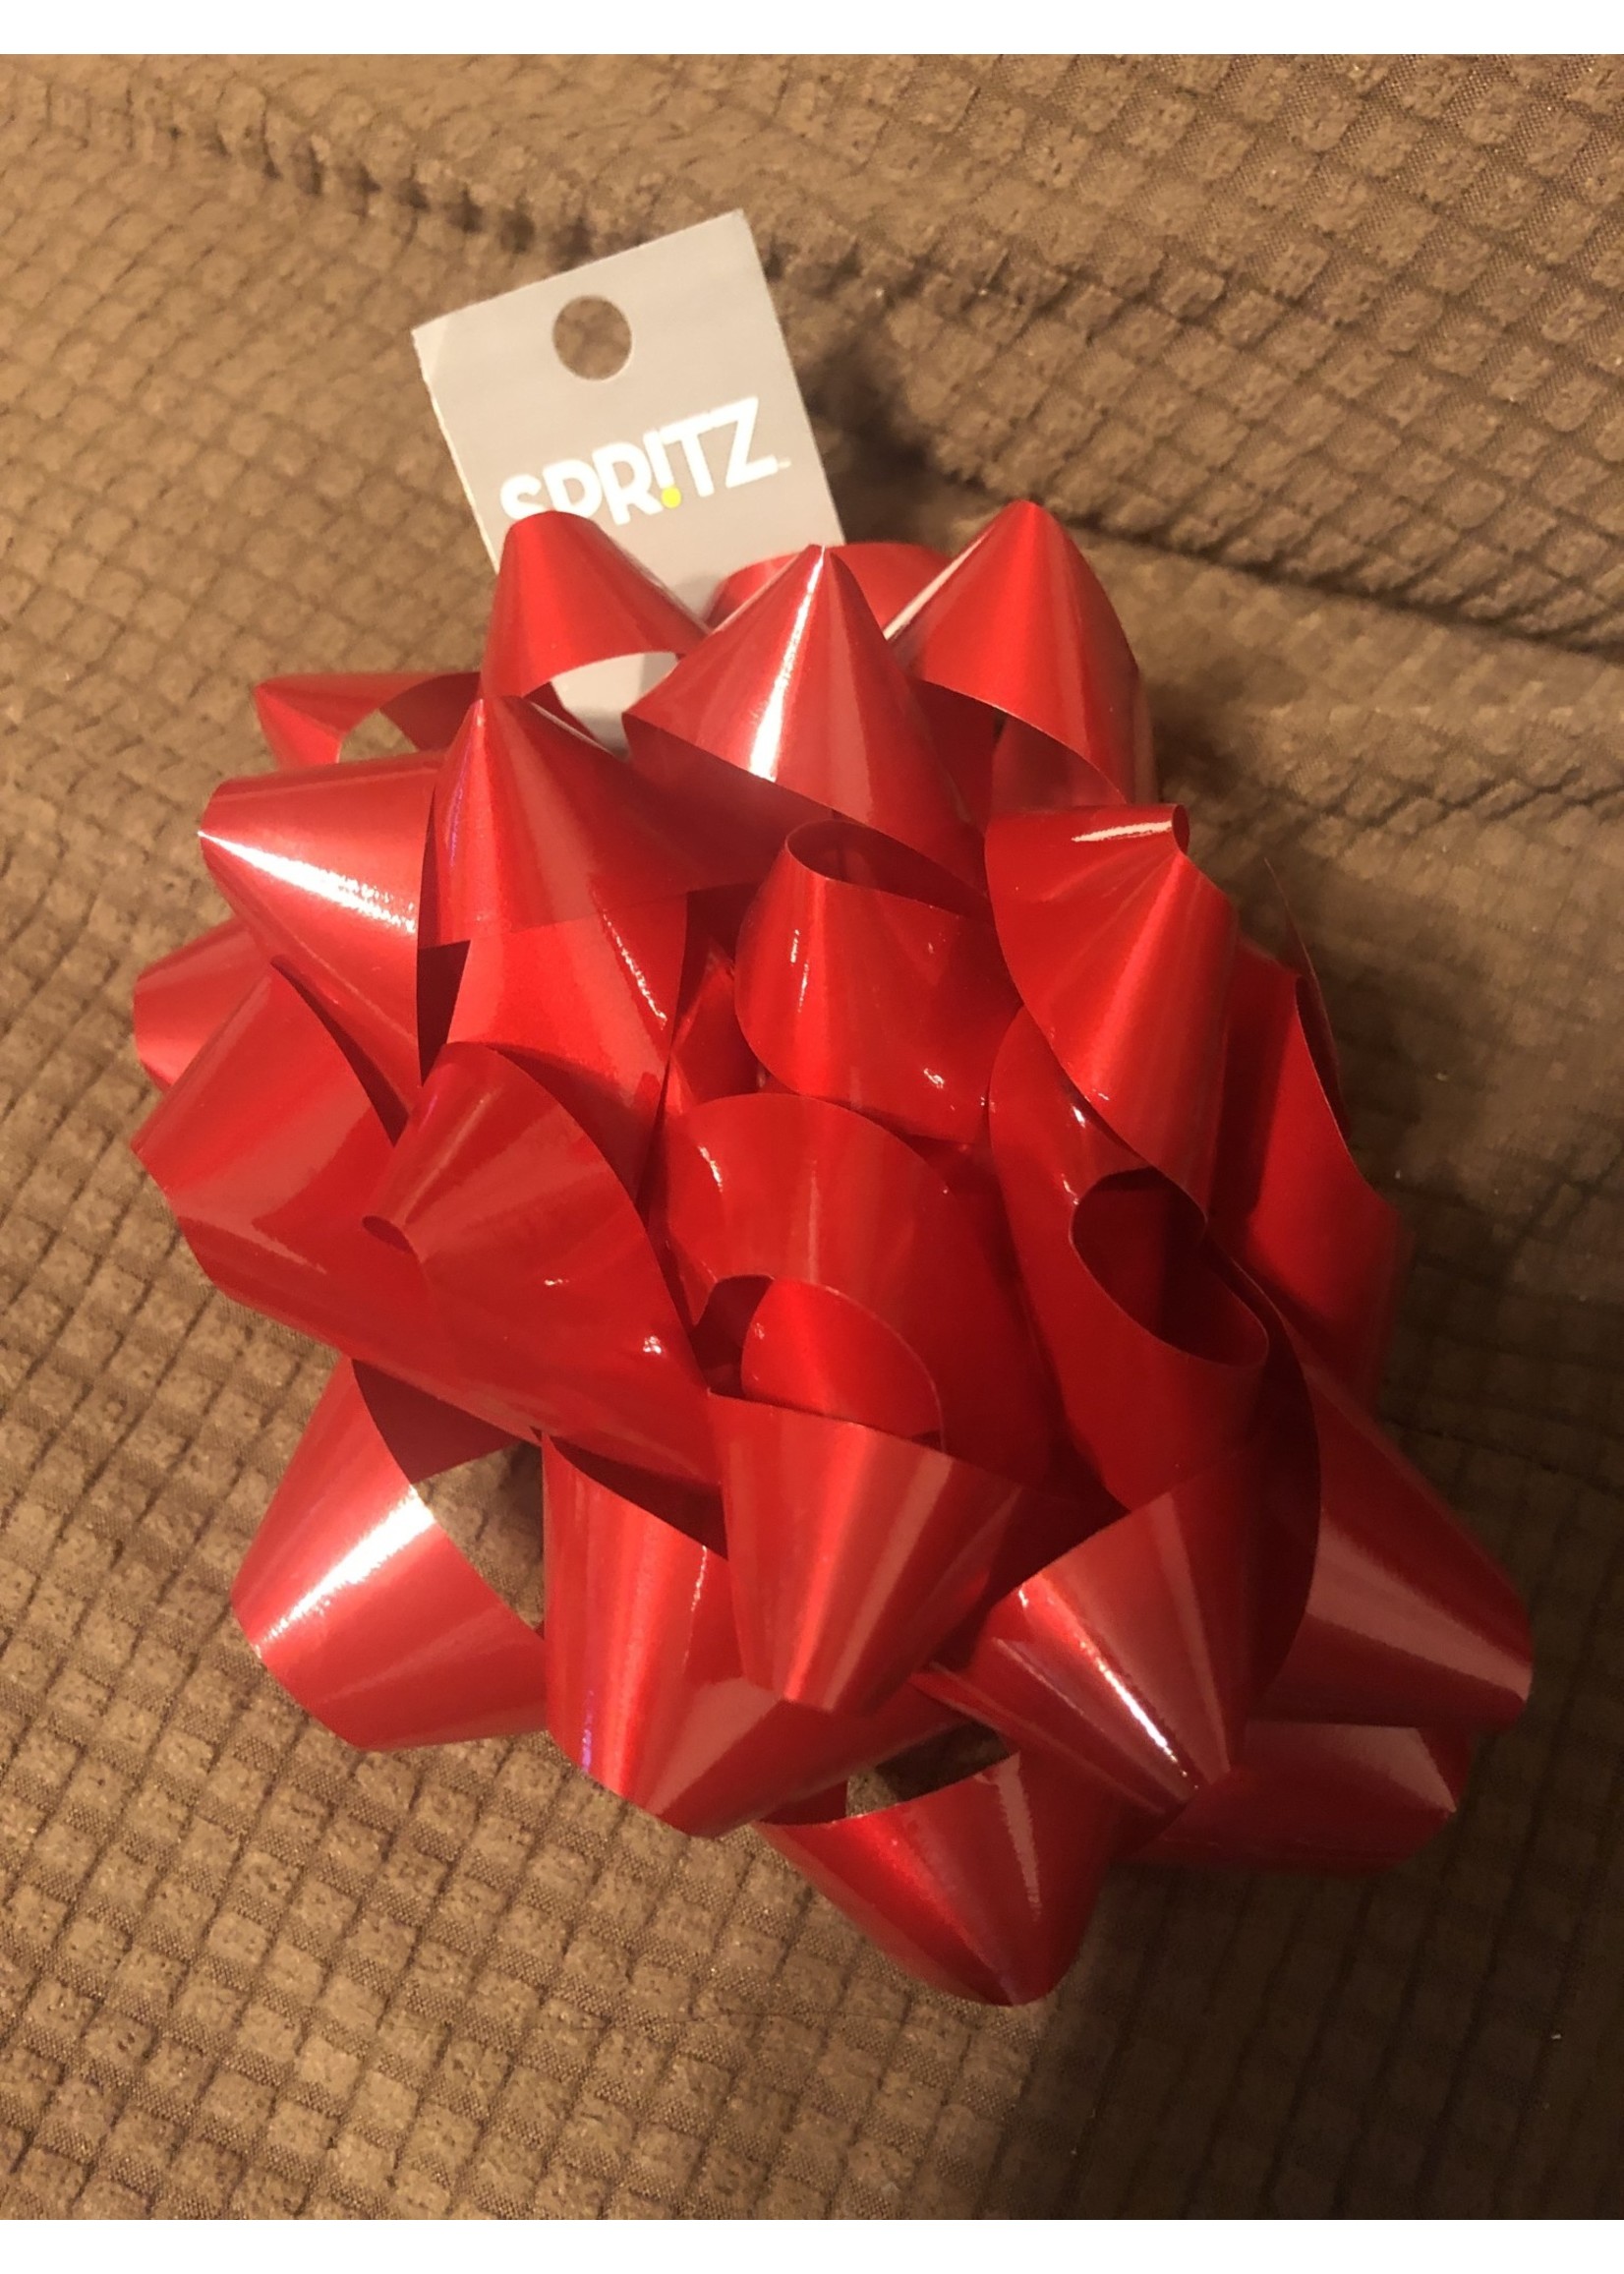 Red Gift Bow - SpritzΓäó